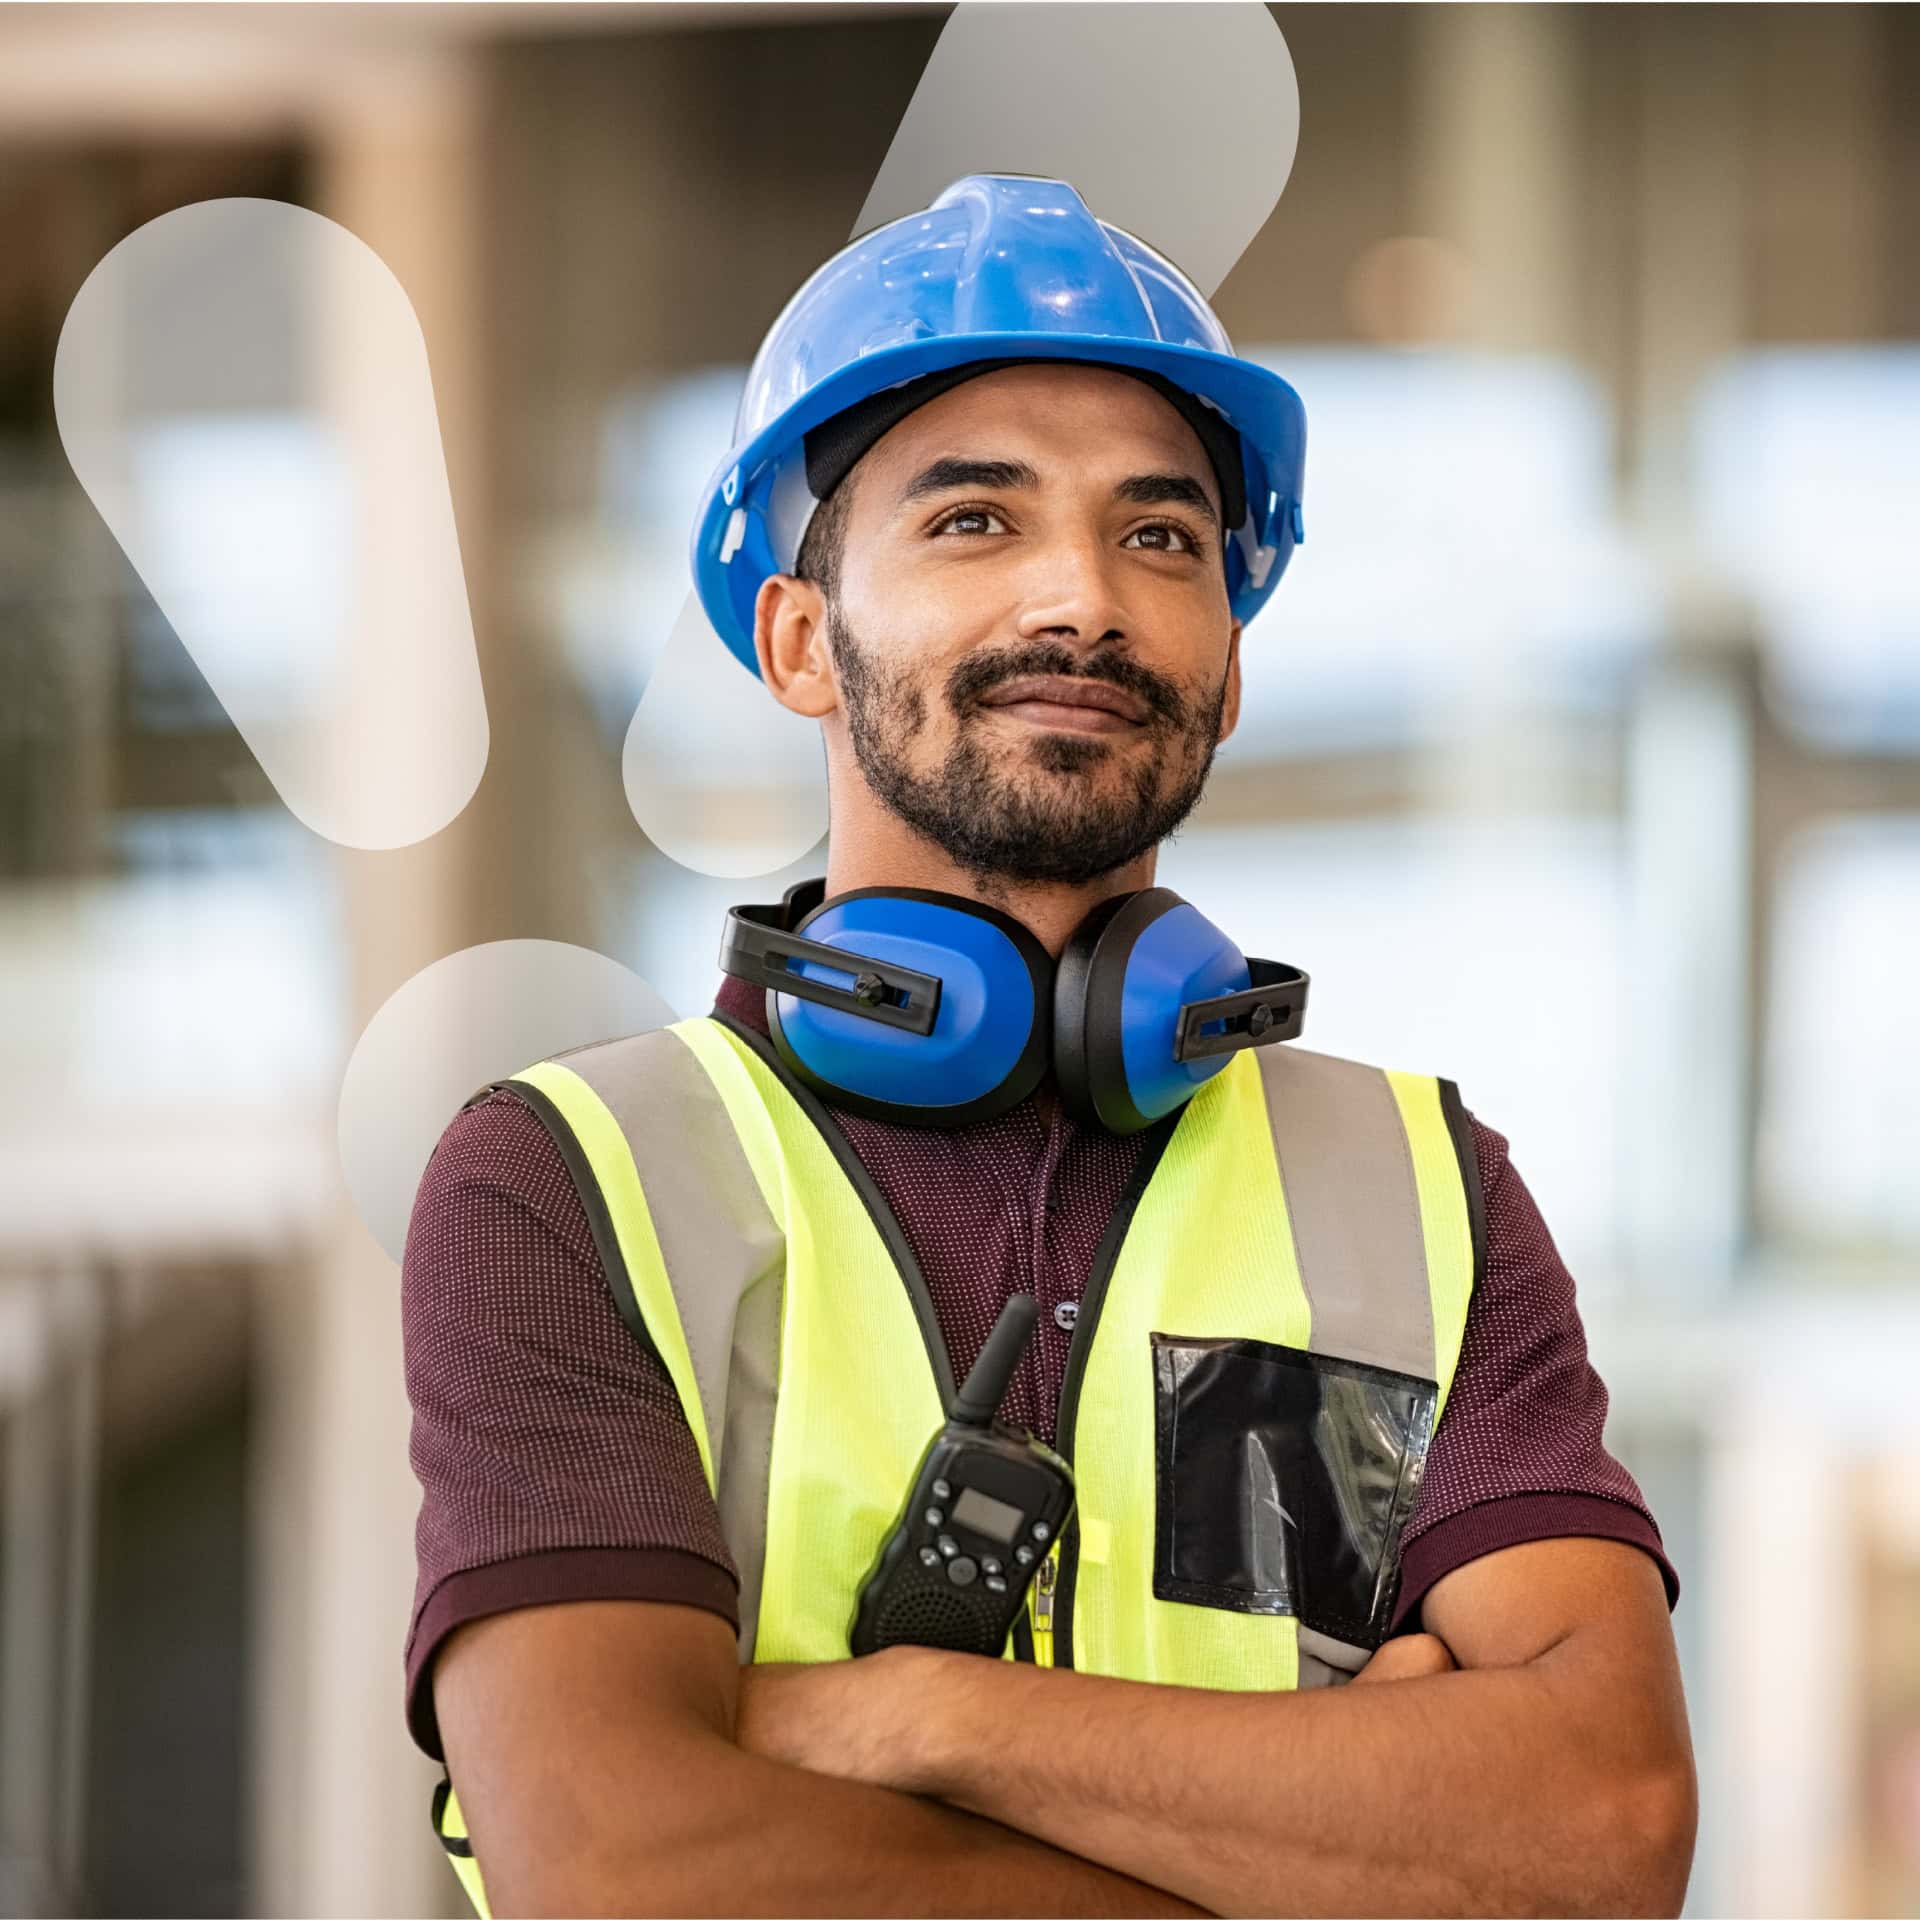 A man wearing a blue construction hat and ear protection stands proudly with arms crossed. He is wearing a high visibility vest for safety while working at a sustainable energy site.